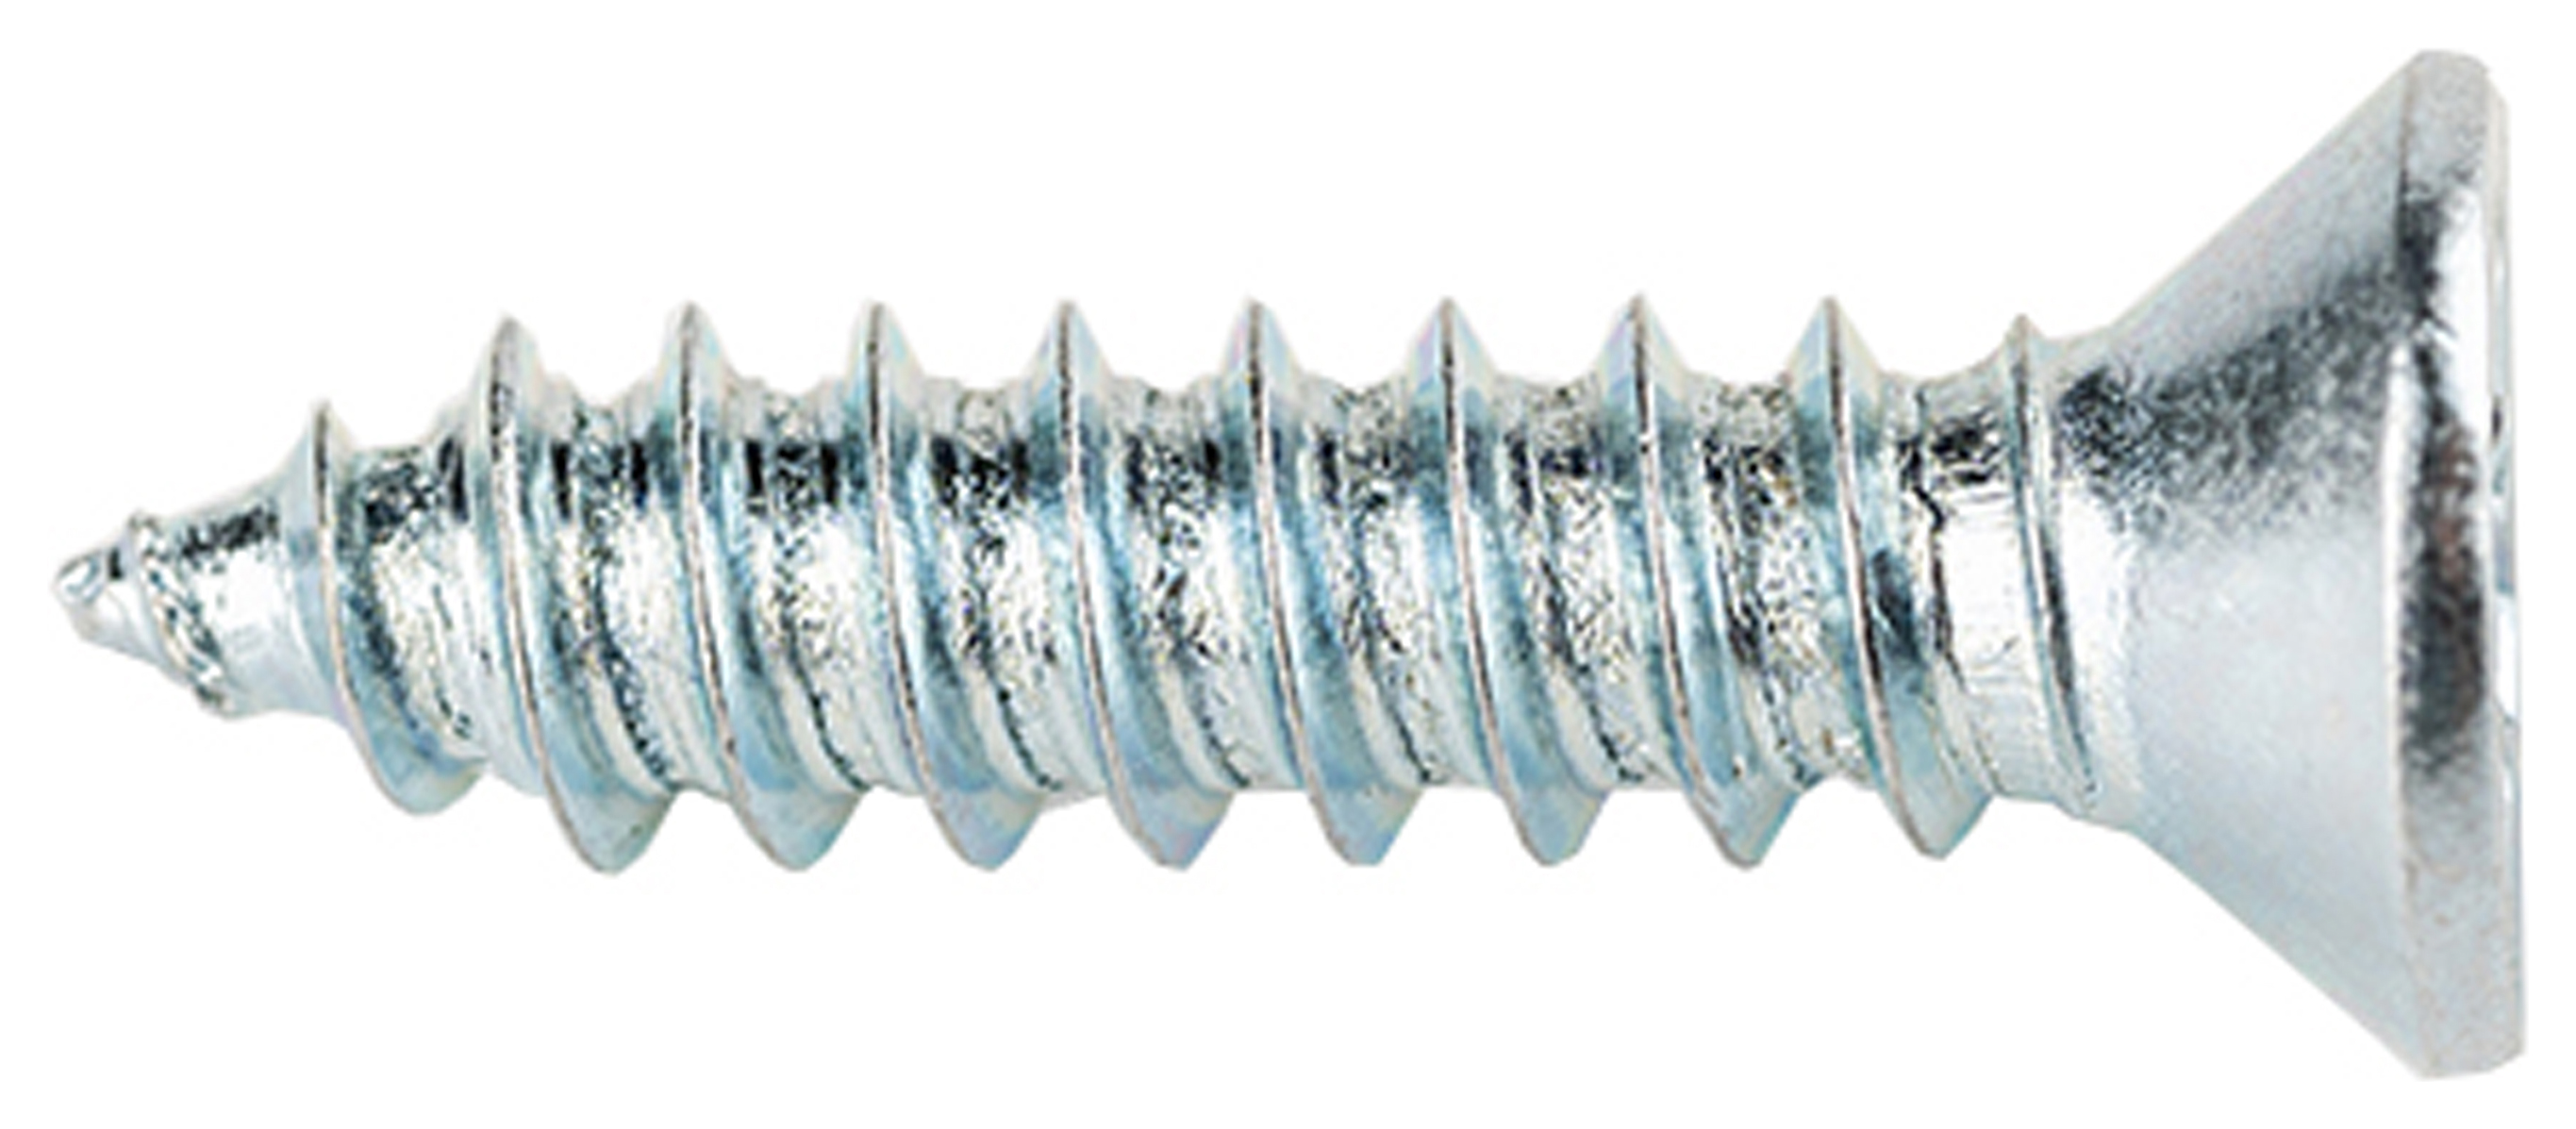 Wickes Self Tapping Countersunk Head Screws - 4 x 20mm - Pack of 100